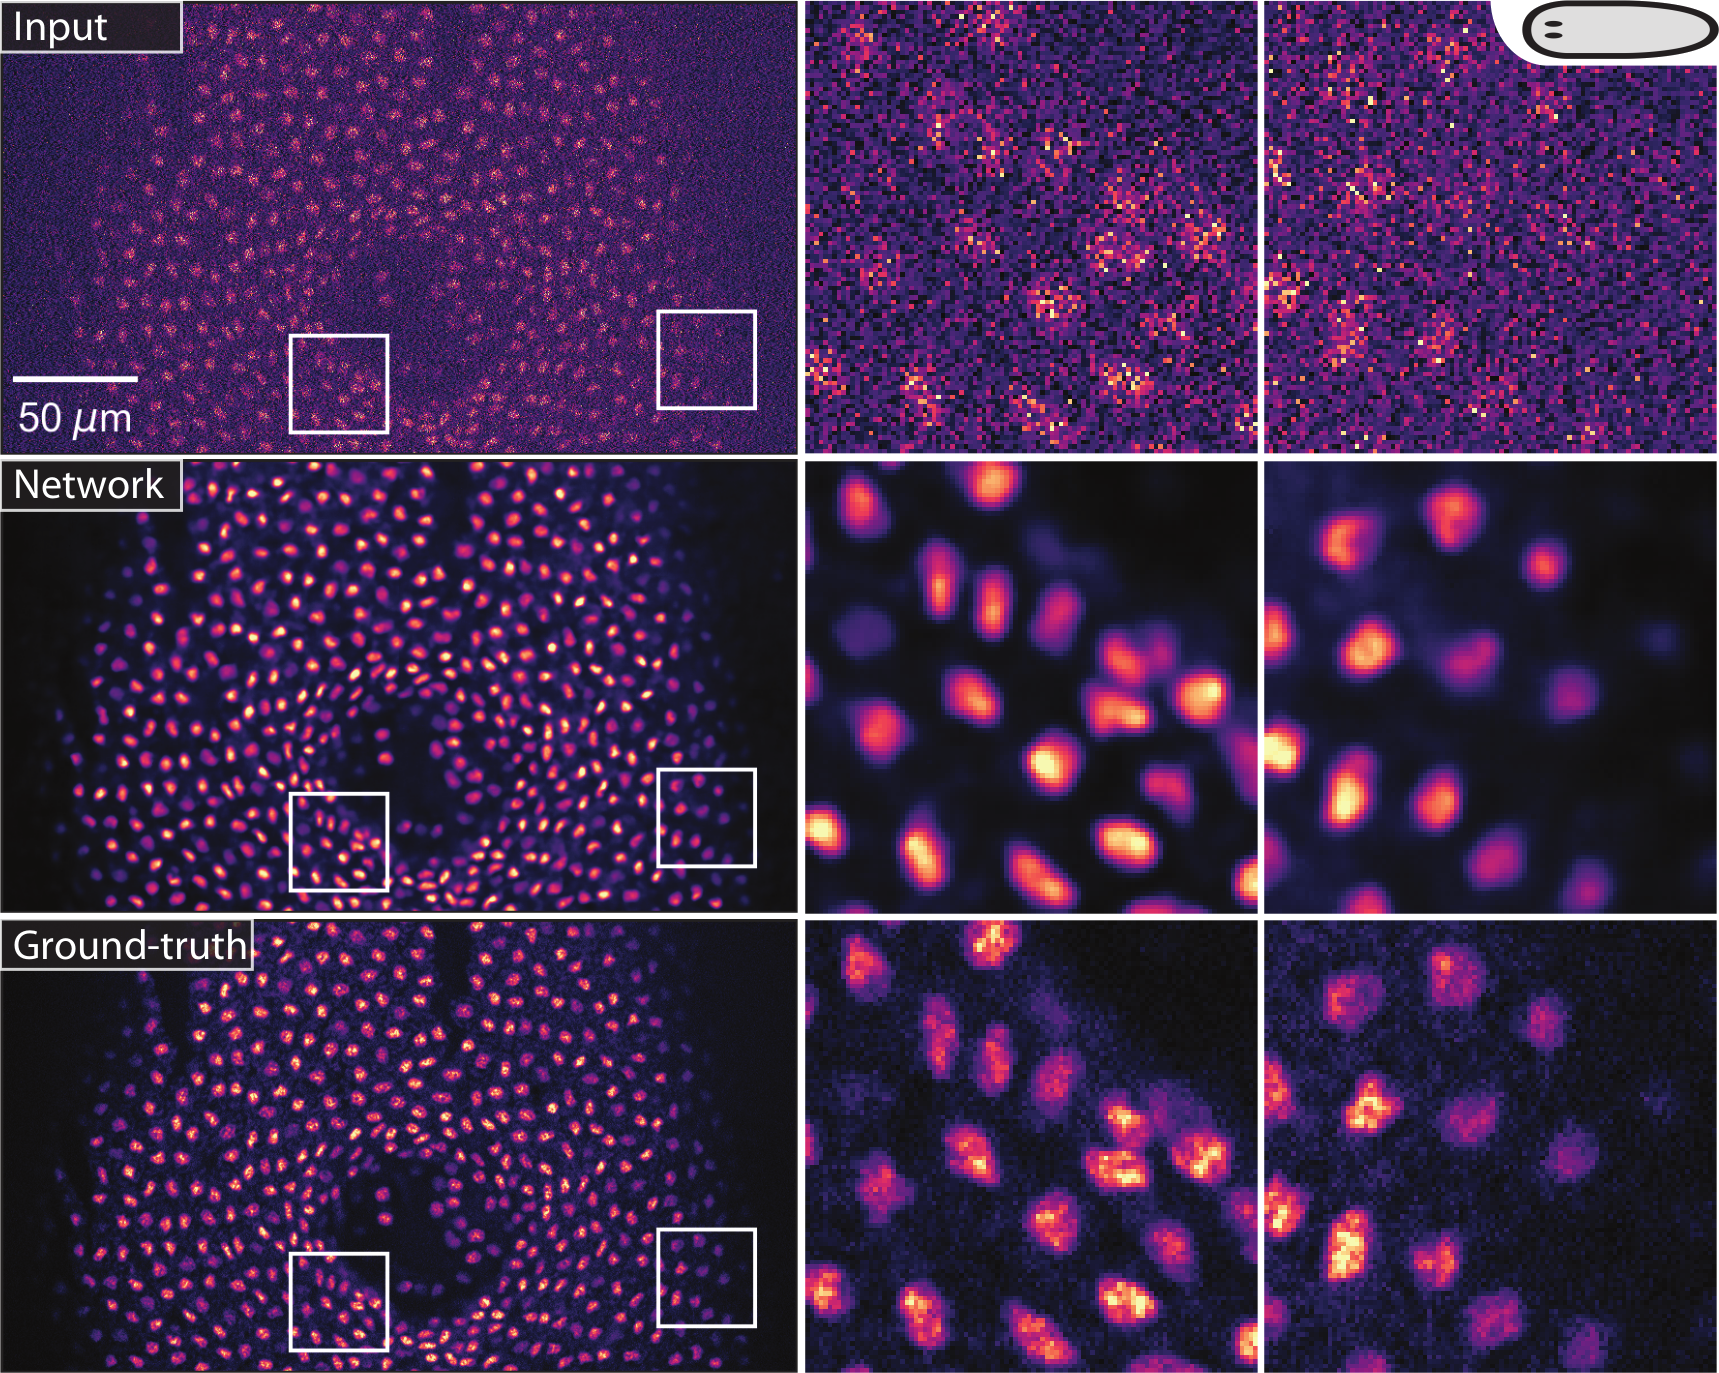 CARE network restoring a low-SNR flatworm image